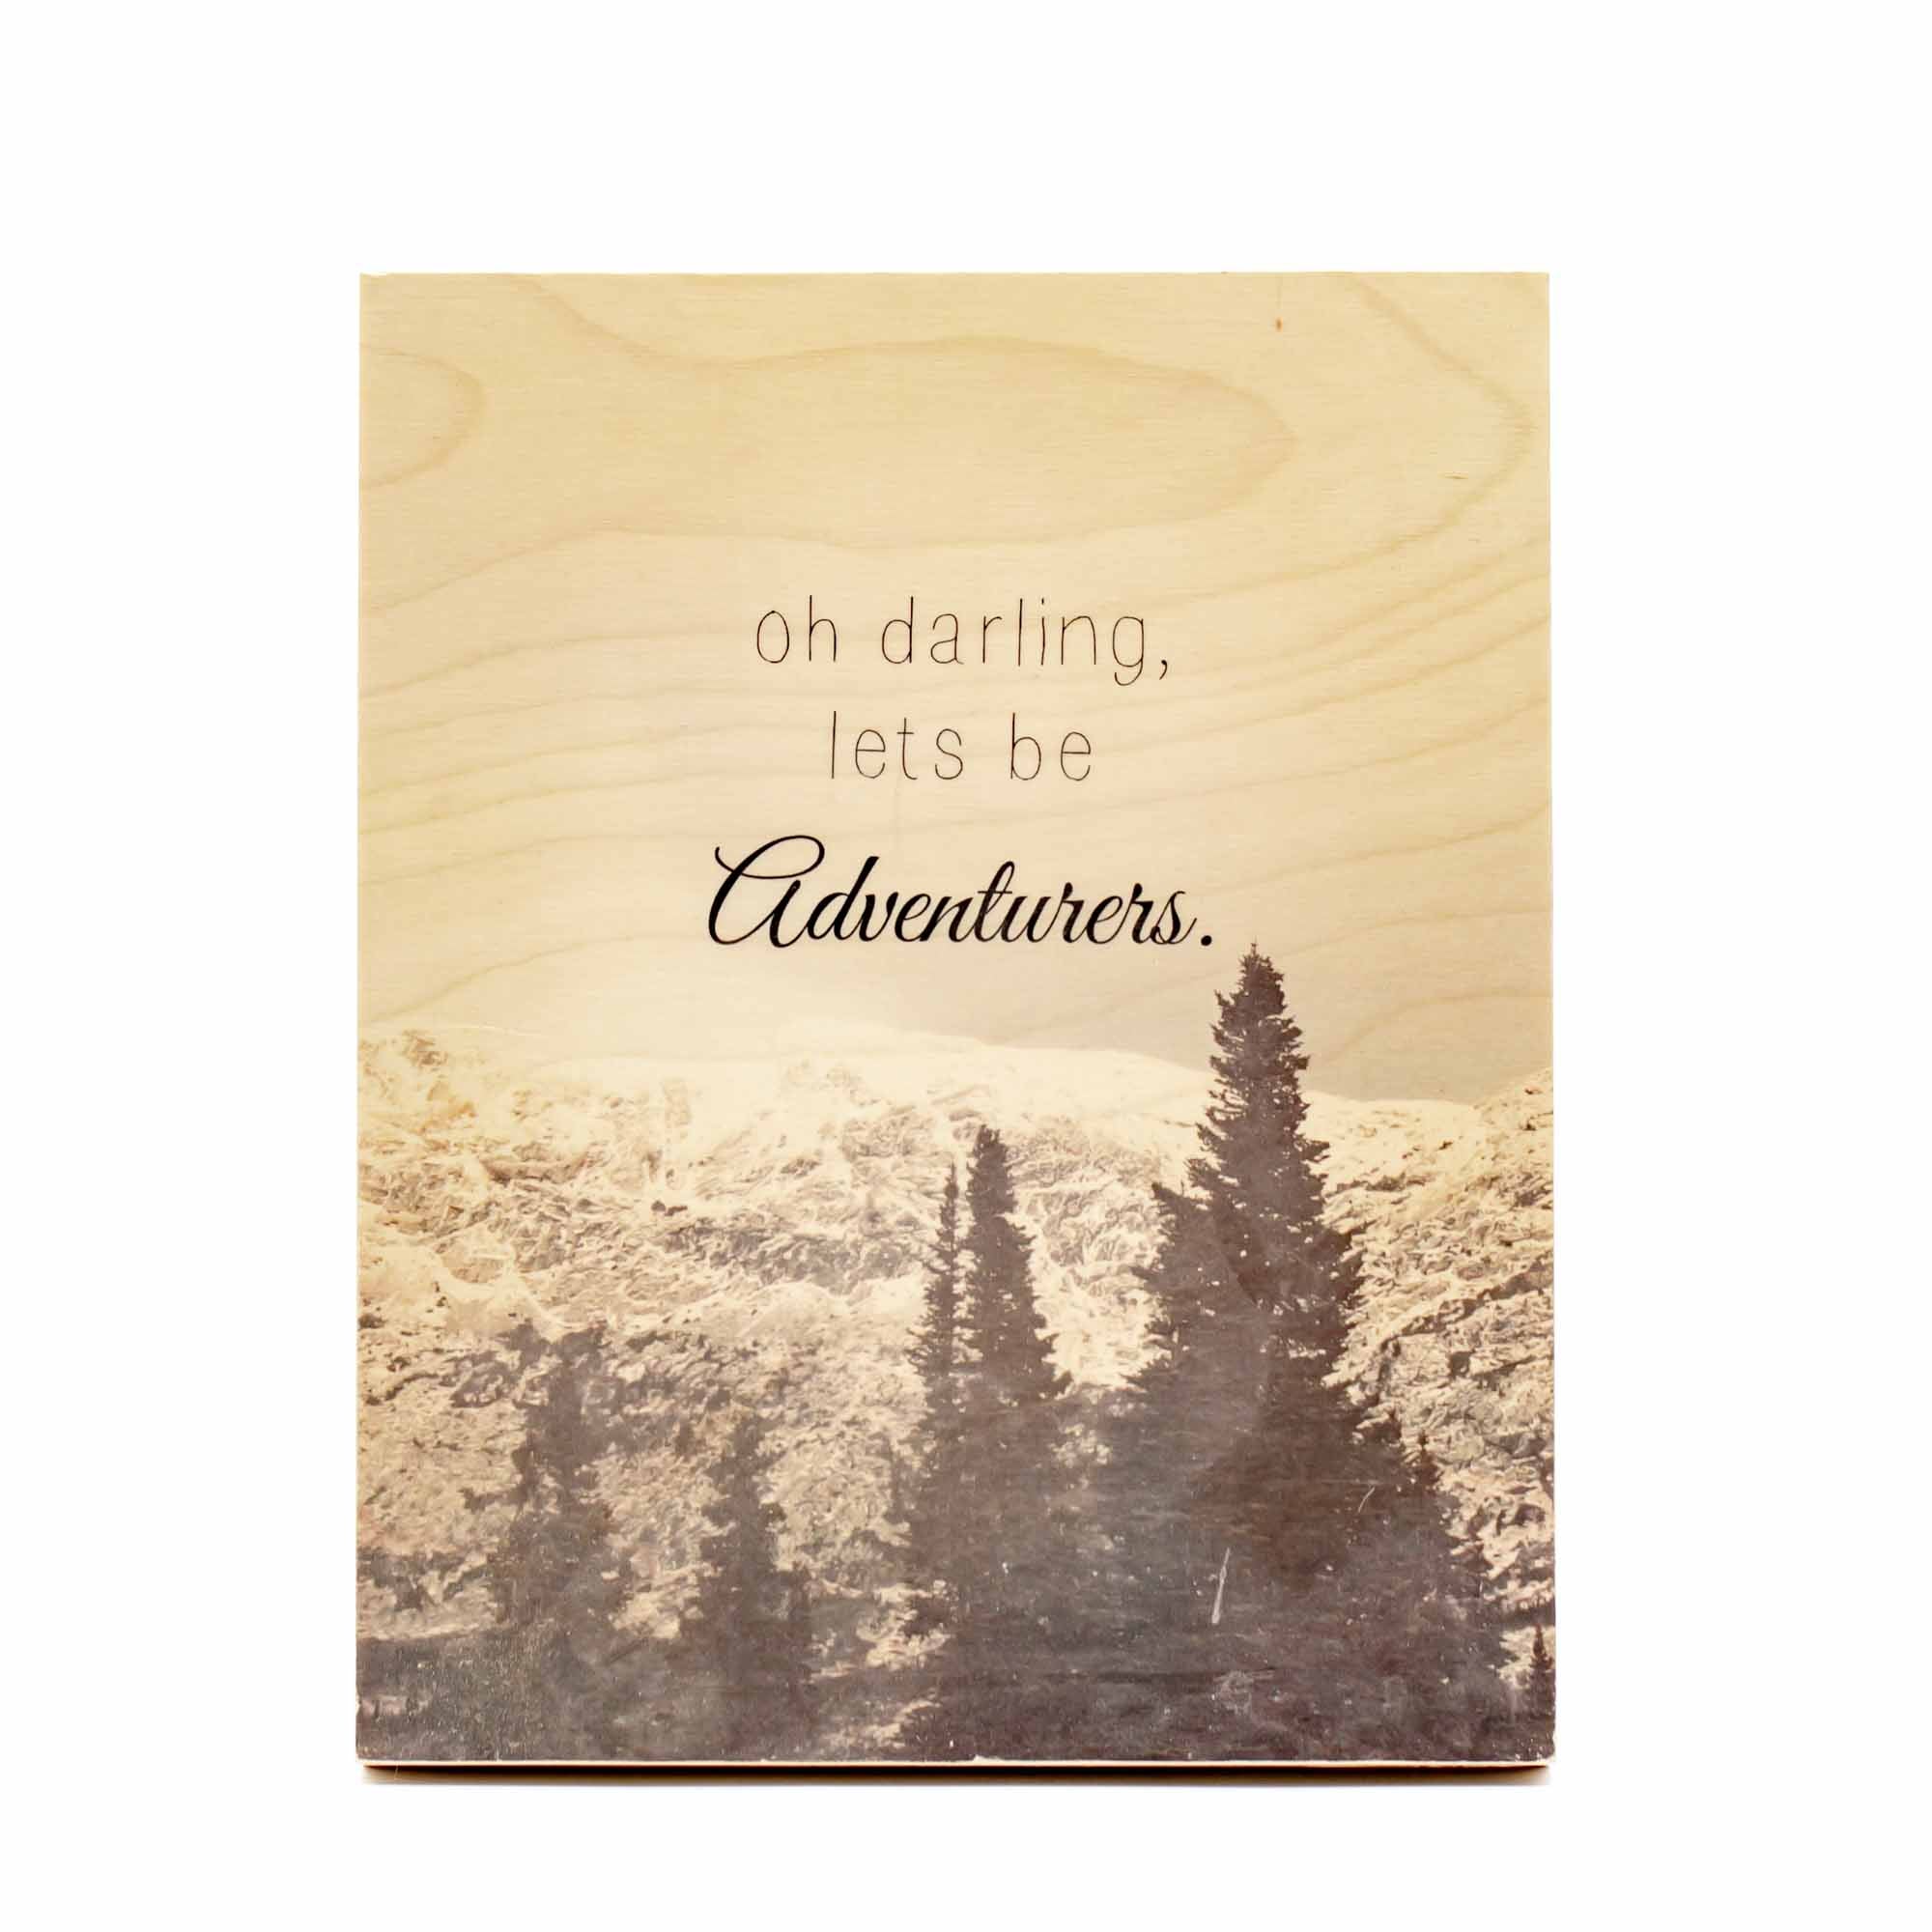 CMB Print Works - Oh Darling, let's be adventurers - Mortise And Tenon